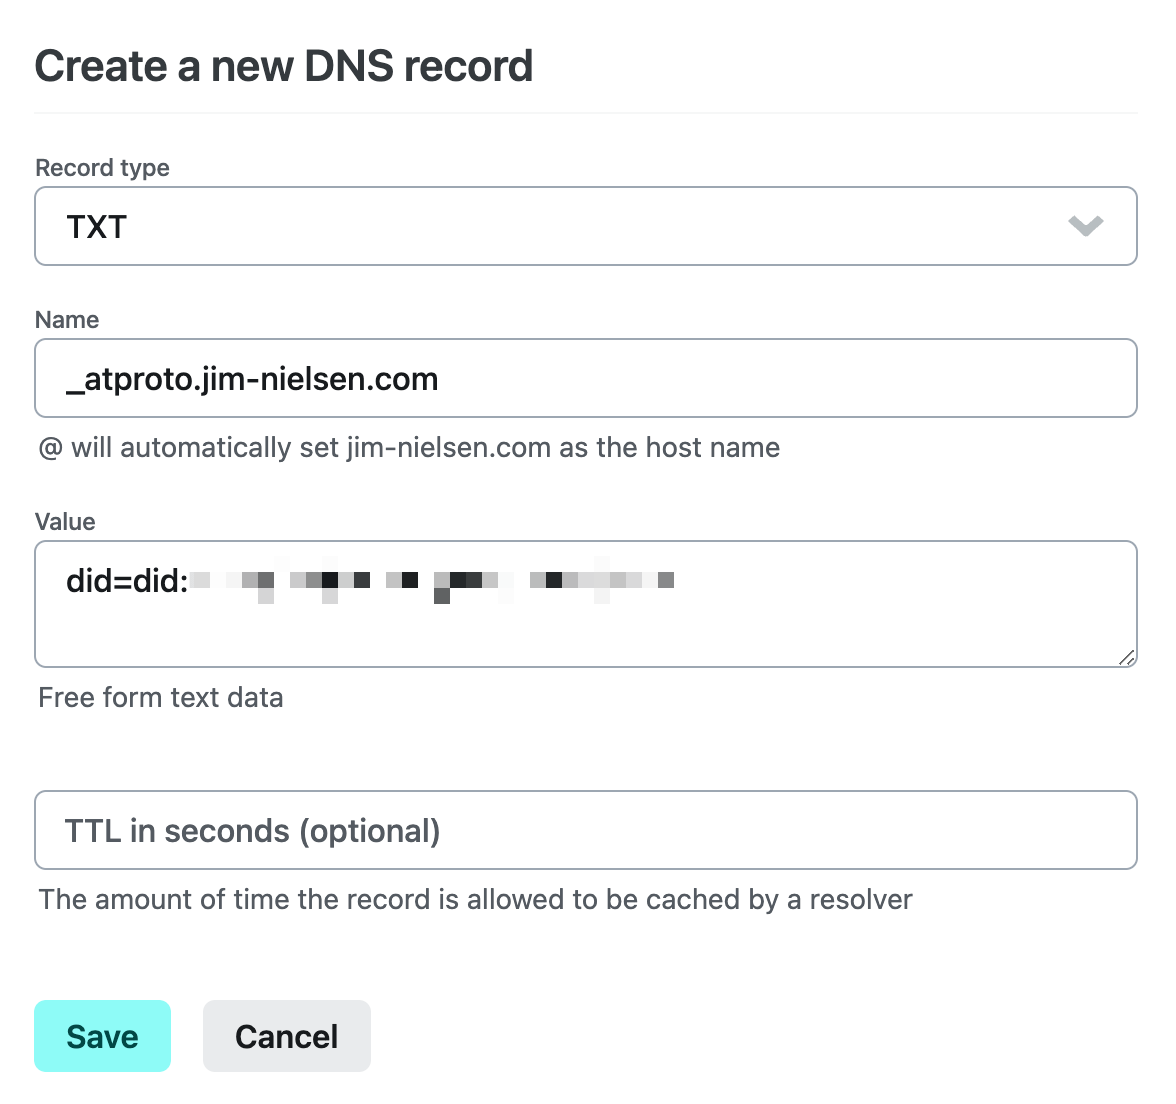 Screenshot of a modal in Netlify where you can create a new DNS record.